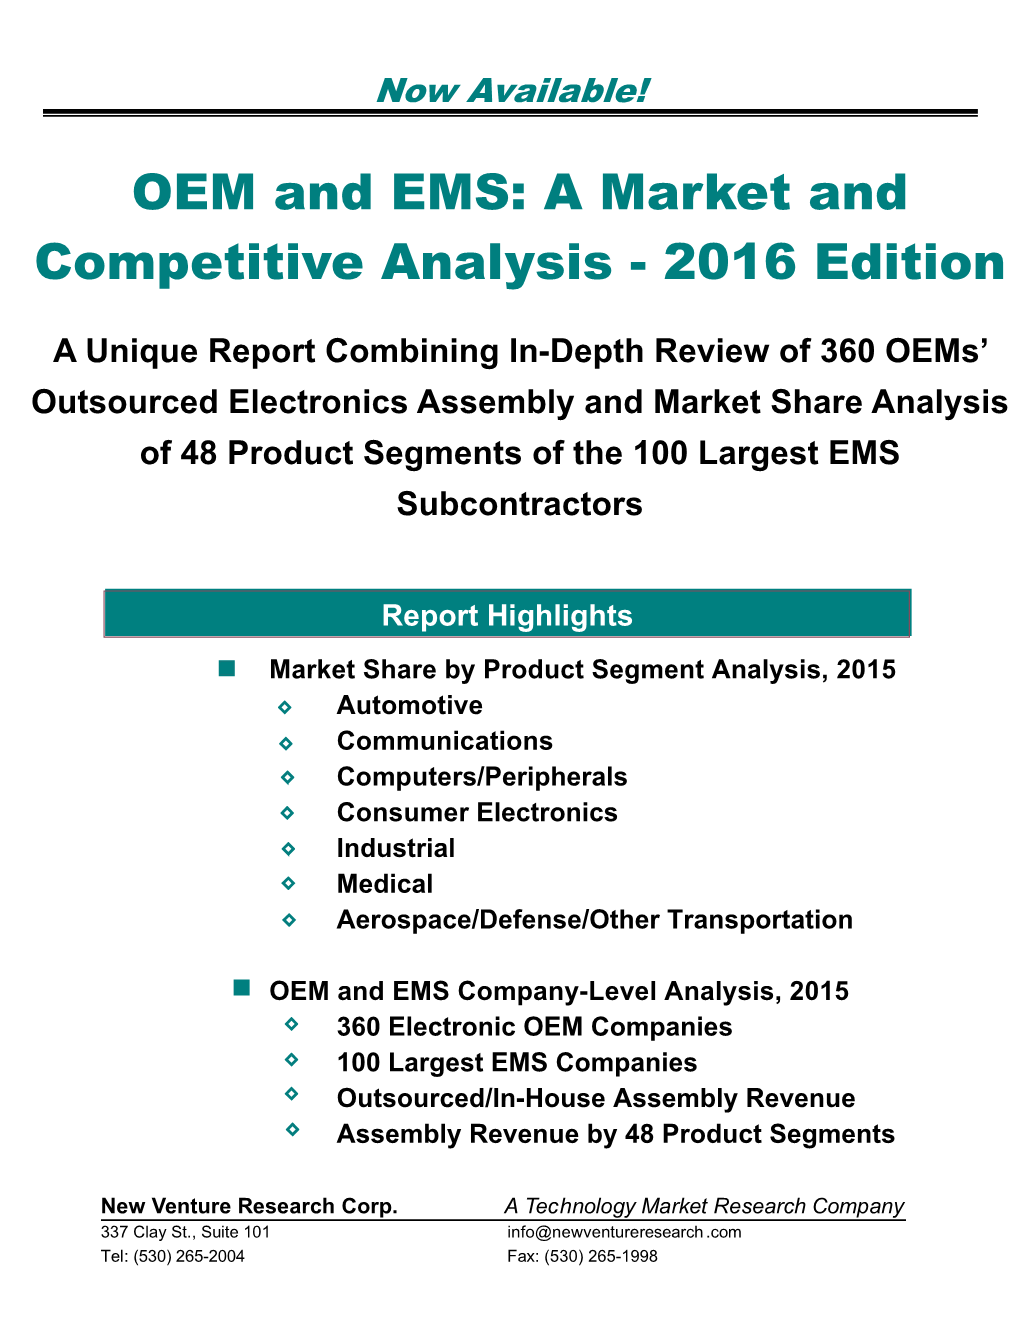 OEM and EMS: a Market and Competitive Analysis - 2016 Edition